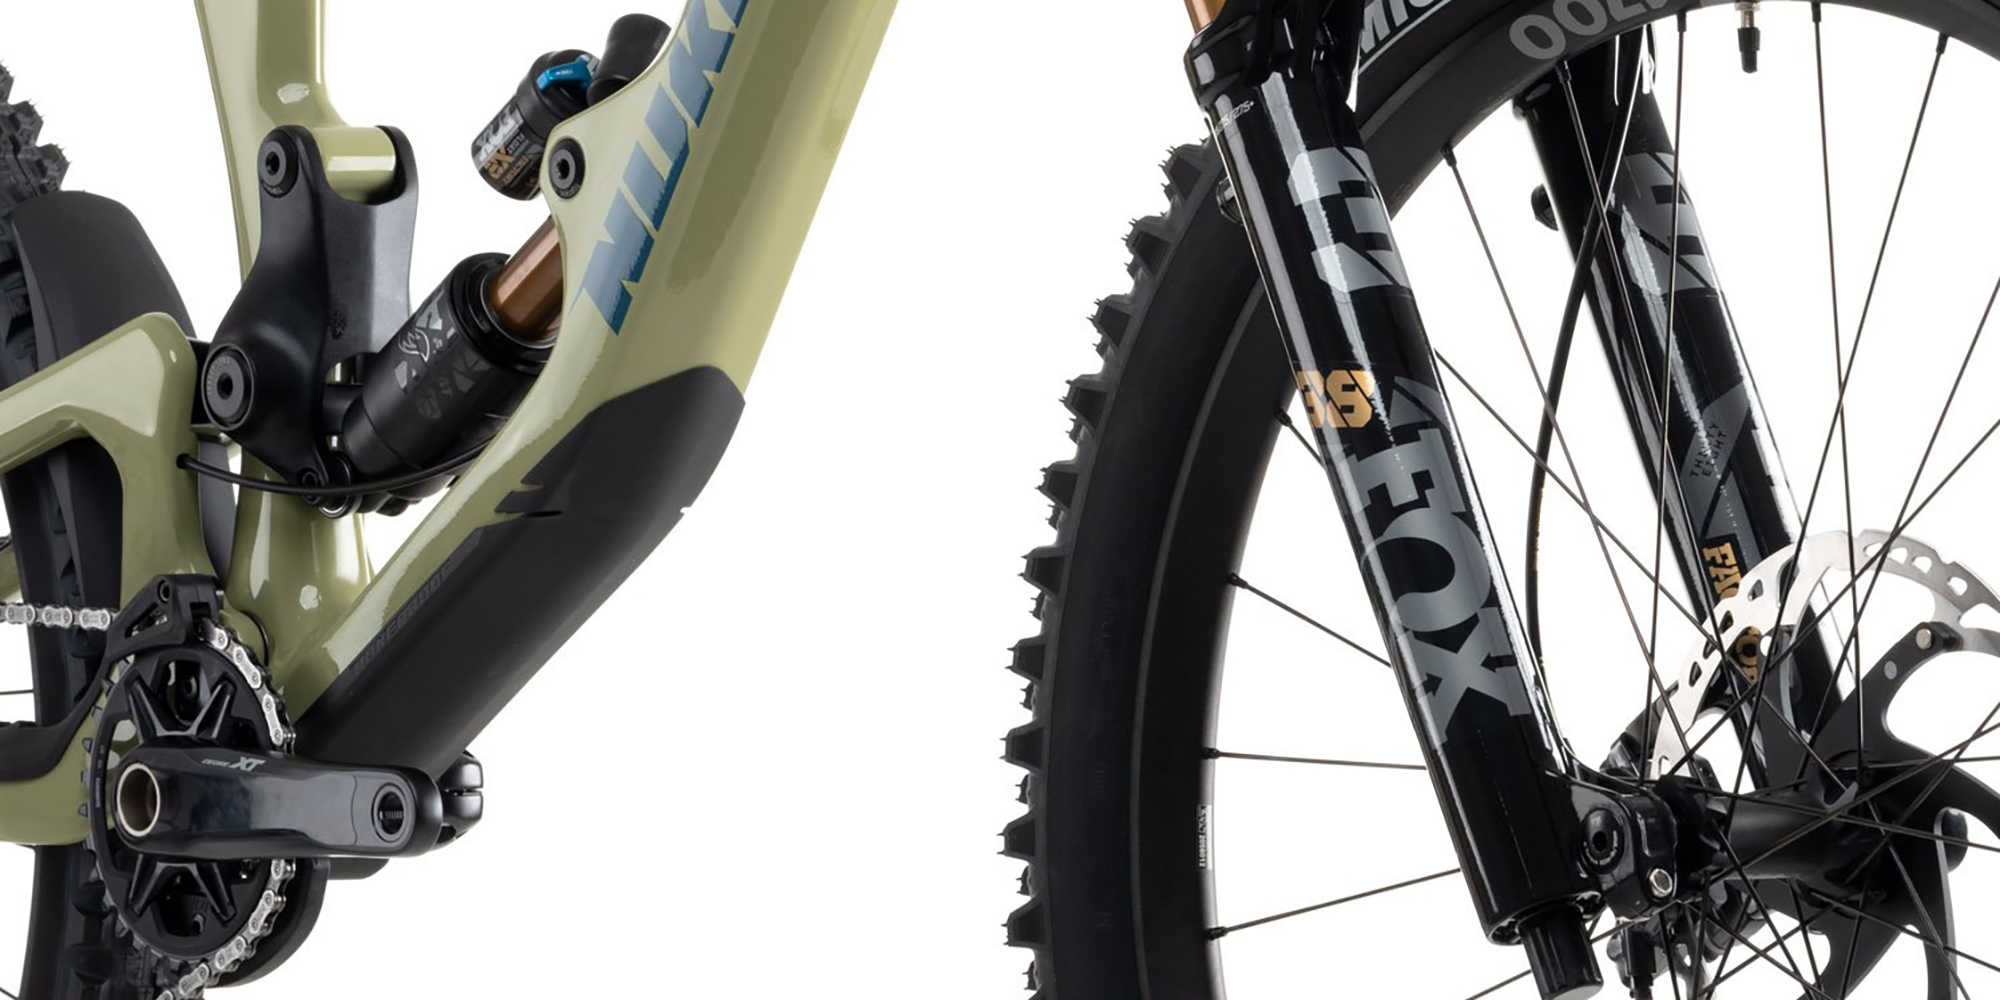 David Golay discusses the Nukeproof Giga for Blister